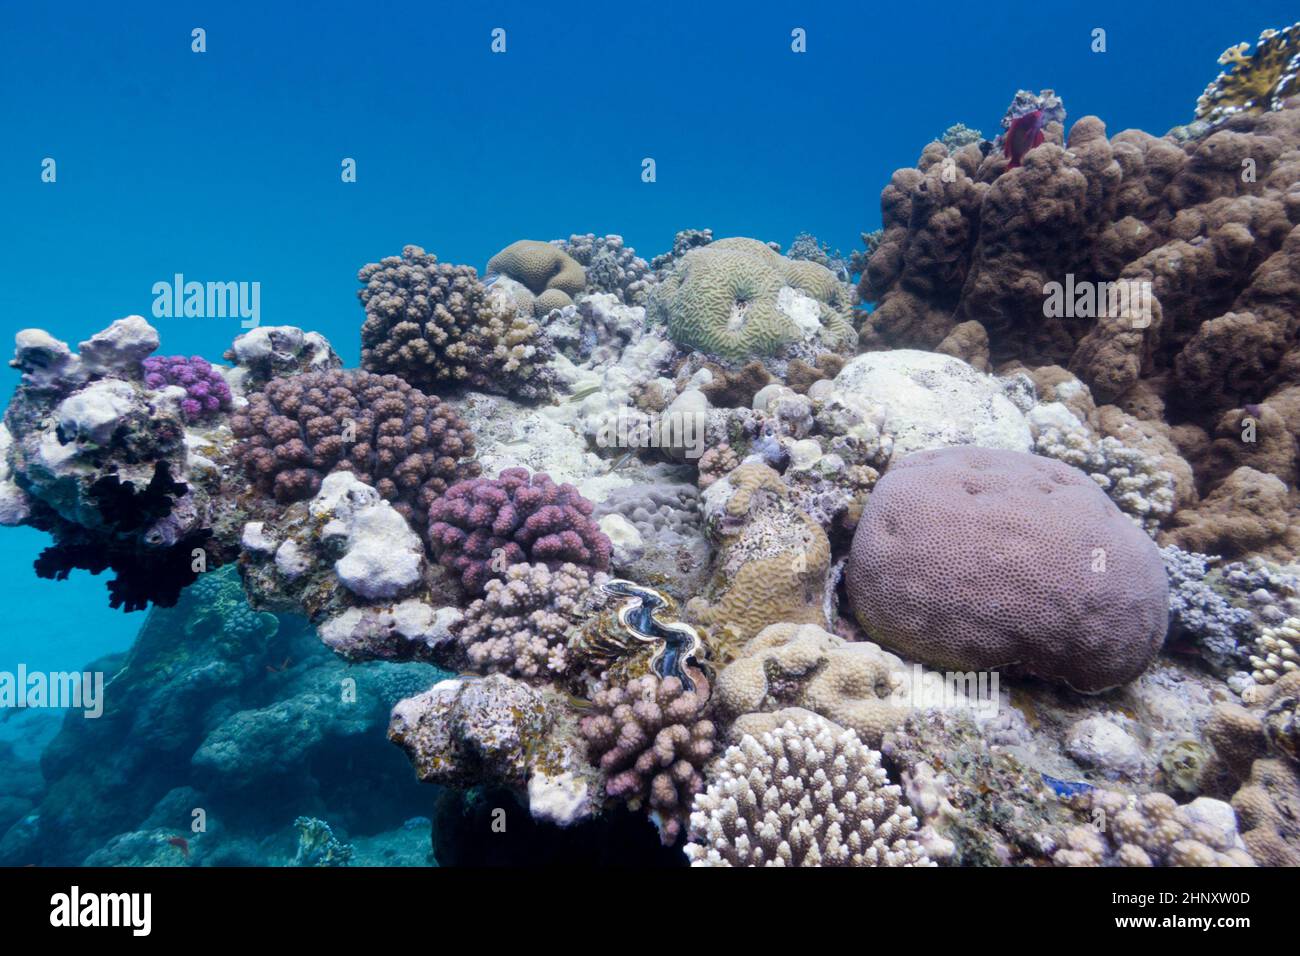 coral reef with stony corals on the bottom of red sea Stock Photo